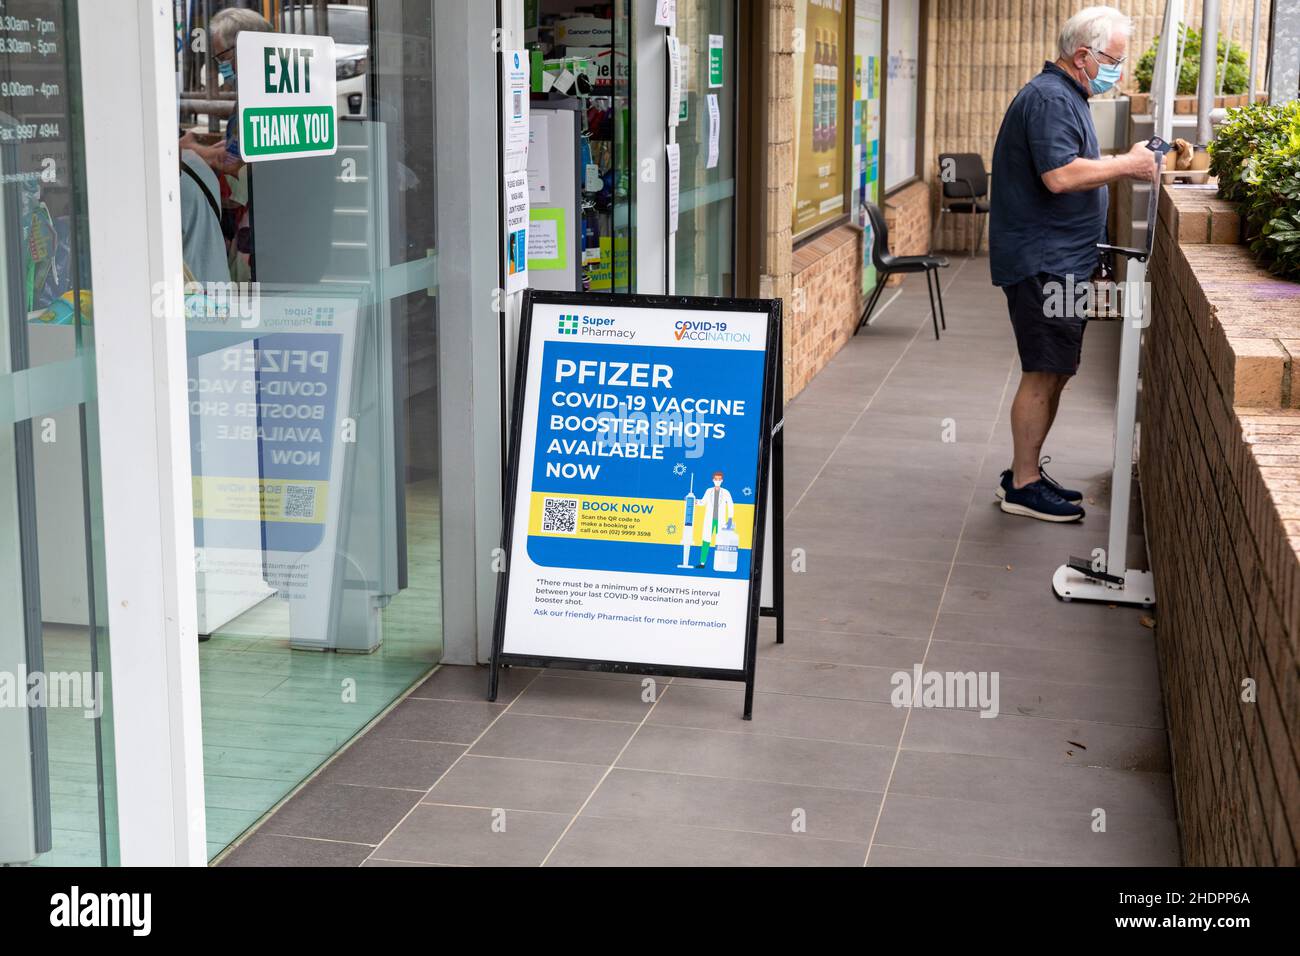 On the day the NSW Government announced over 38000 new cases, australians conitinue to search for rapid antigen test kits which are largely unavaialbe and pharmacies roll out booster jabs for those who are double vaccinated, Sydney,Australia.Credit martin berry@ alamy live news. Stock Photo